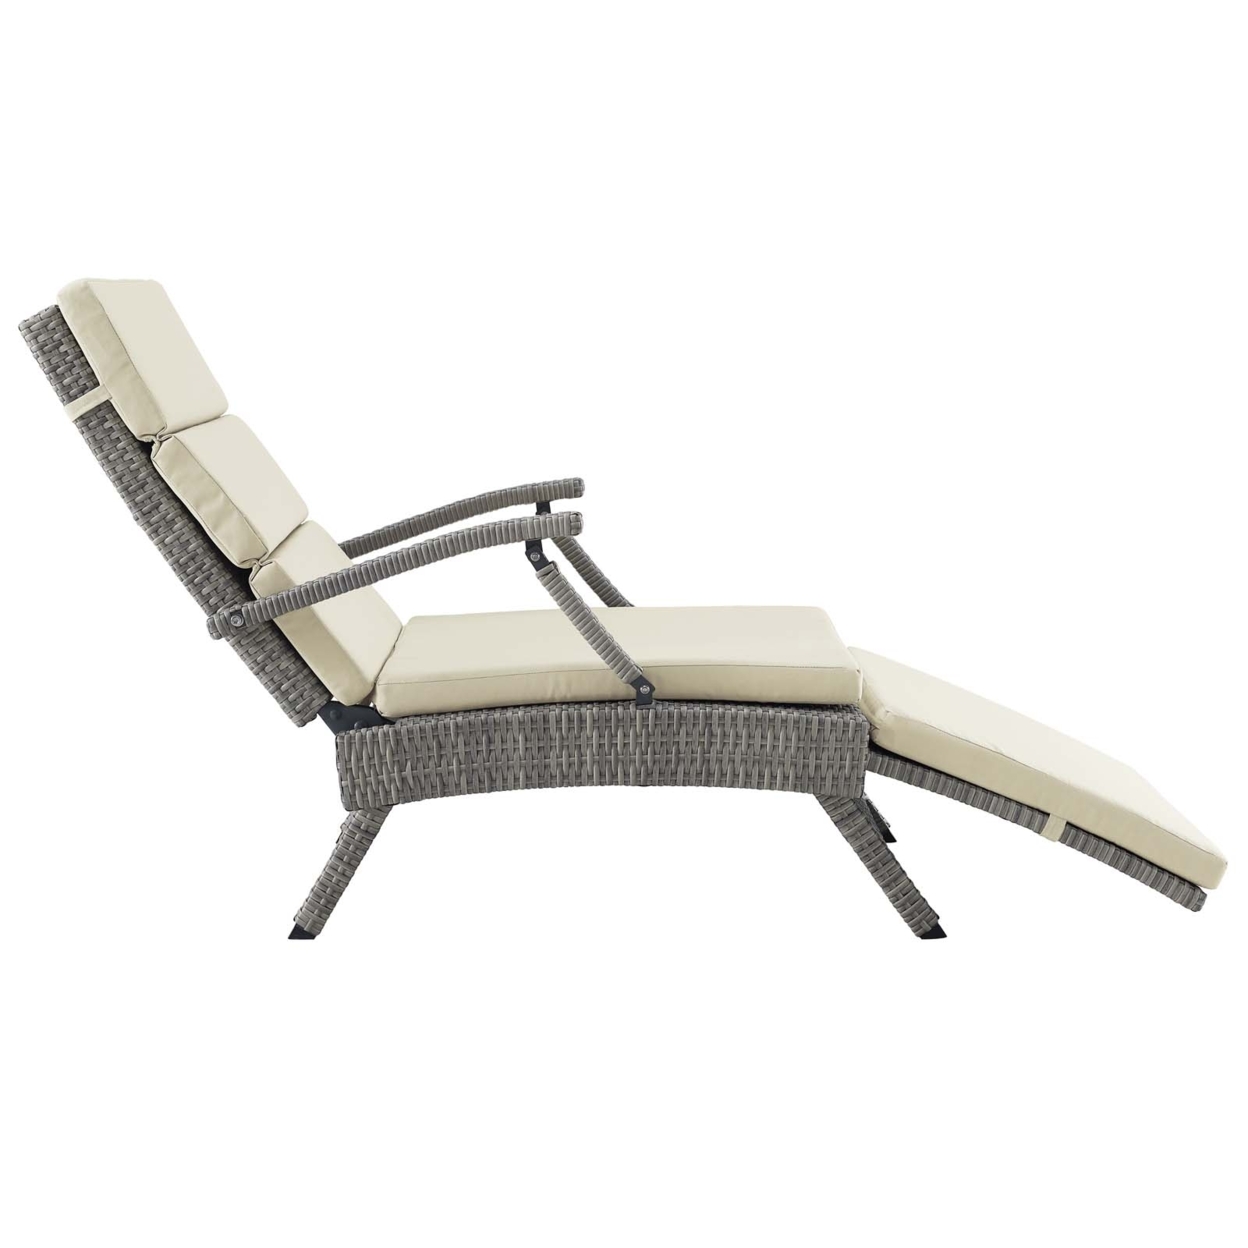 Envisage Chaise Outdoor Patio Wicker Rattan Lounge ChairLight Gray Beige - image 2 of 7